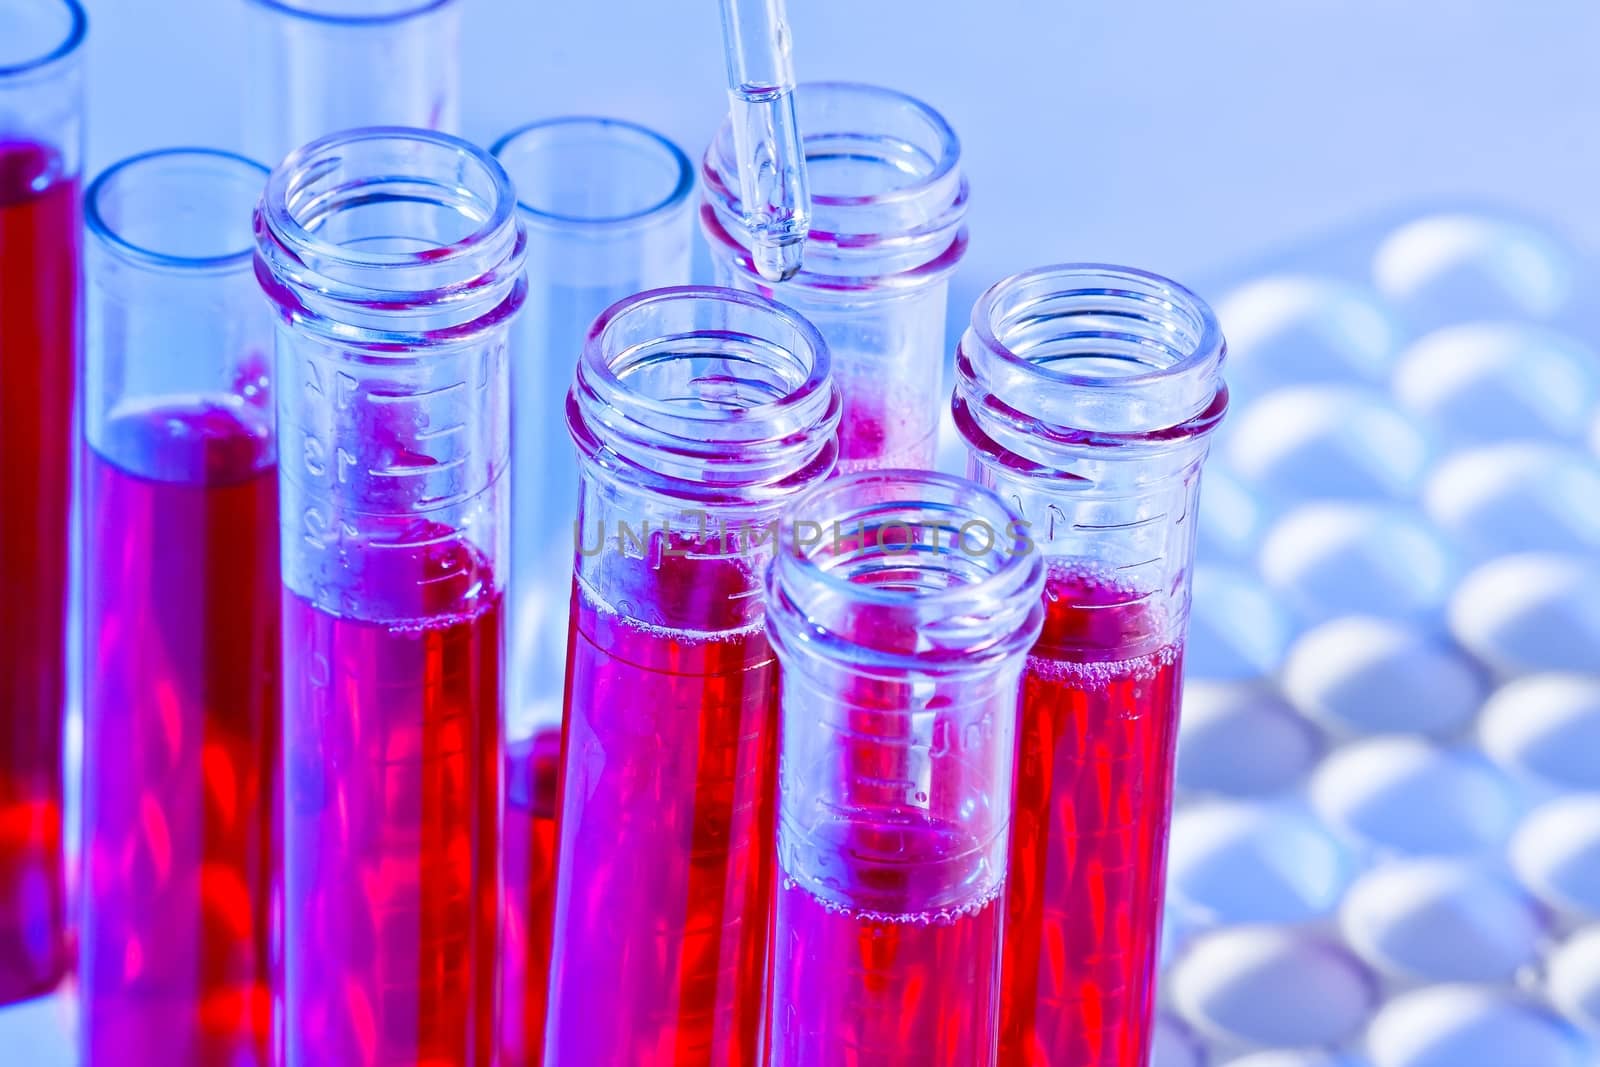 detail of pipette and test tubes with red liquid in laboratory on blue light tint background